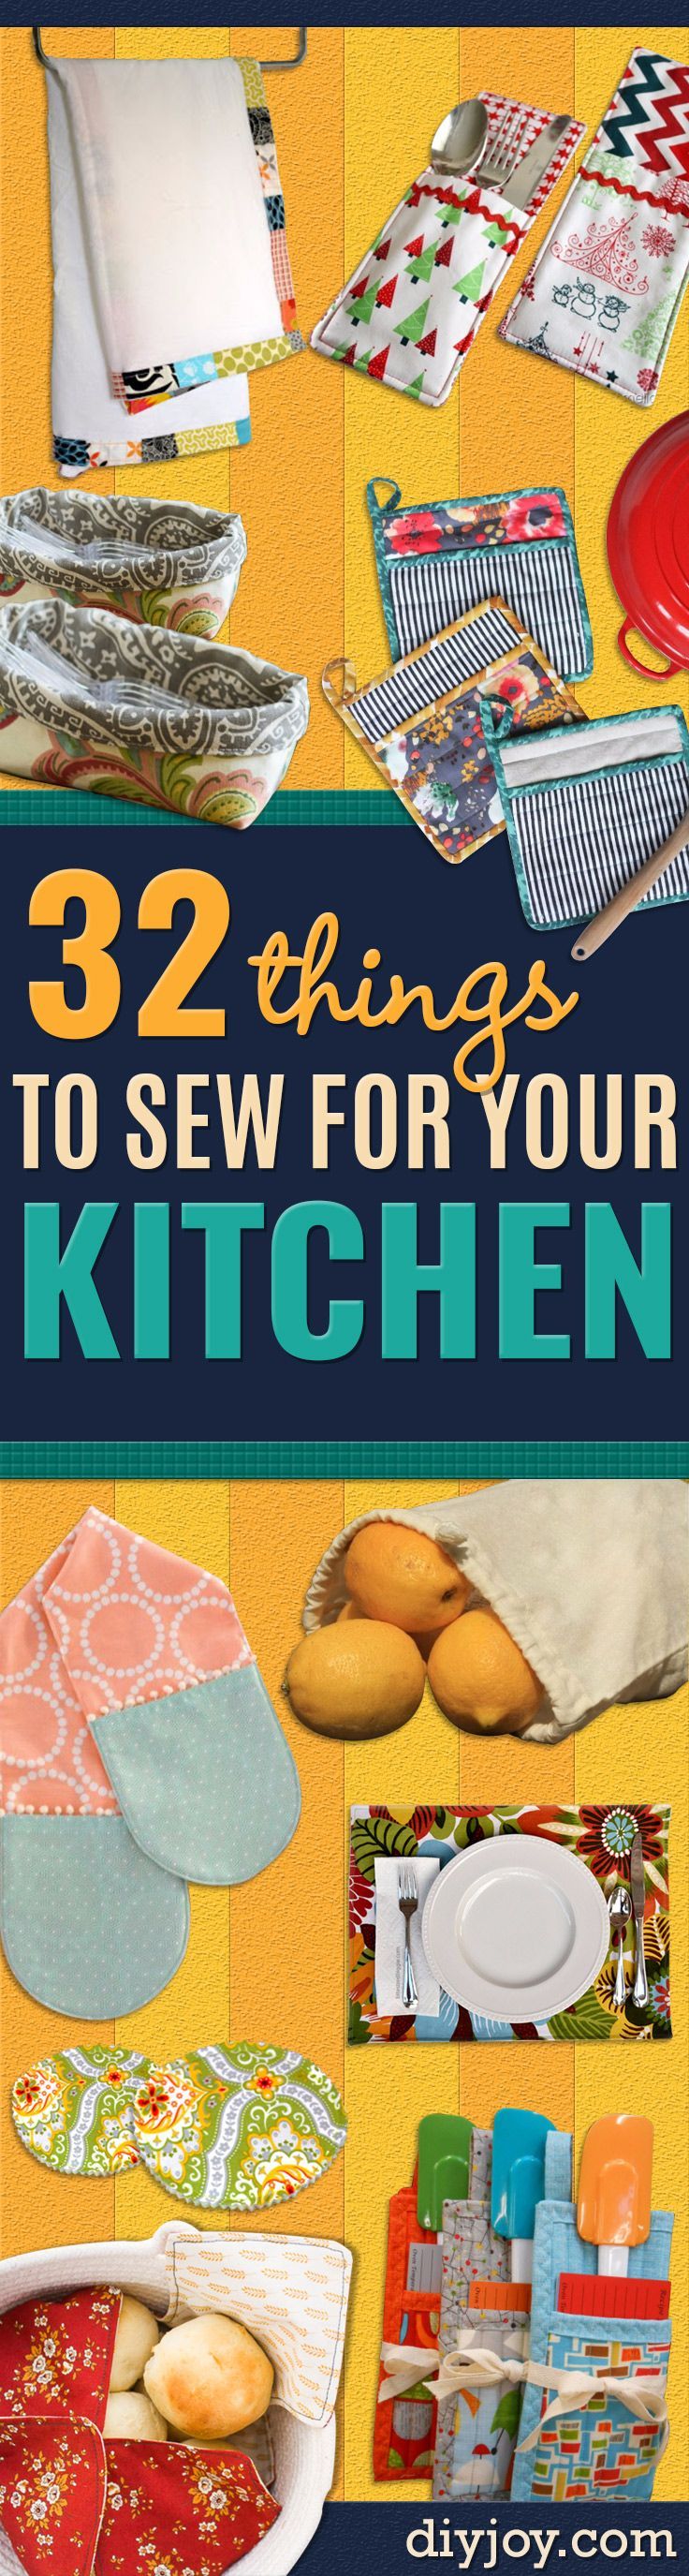 *napkins* DIY Sewing Projects for the Kitchen – Easy Sewing Tutorials and Patterns for Towels, napkinds, aprons and cool Christmas